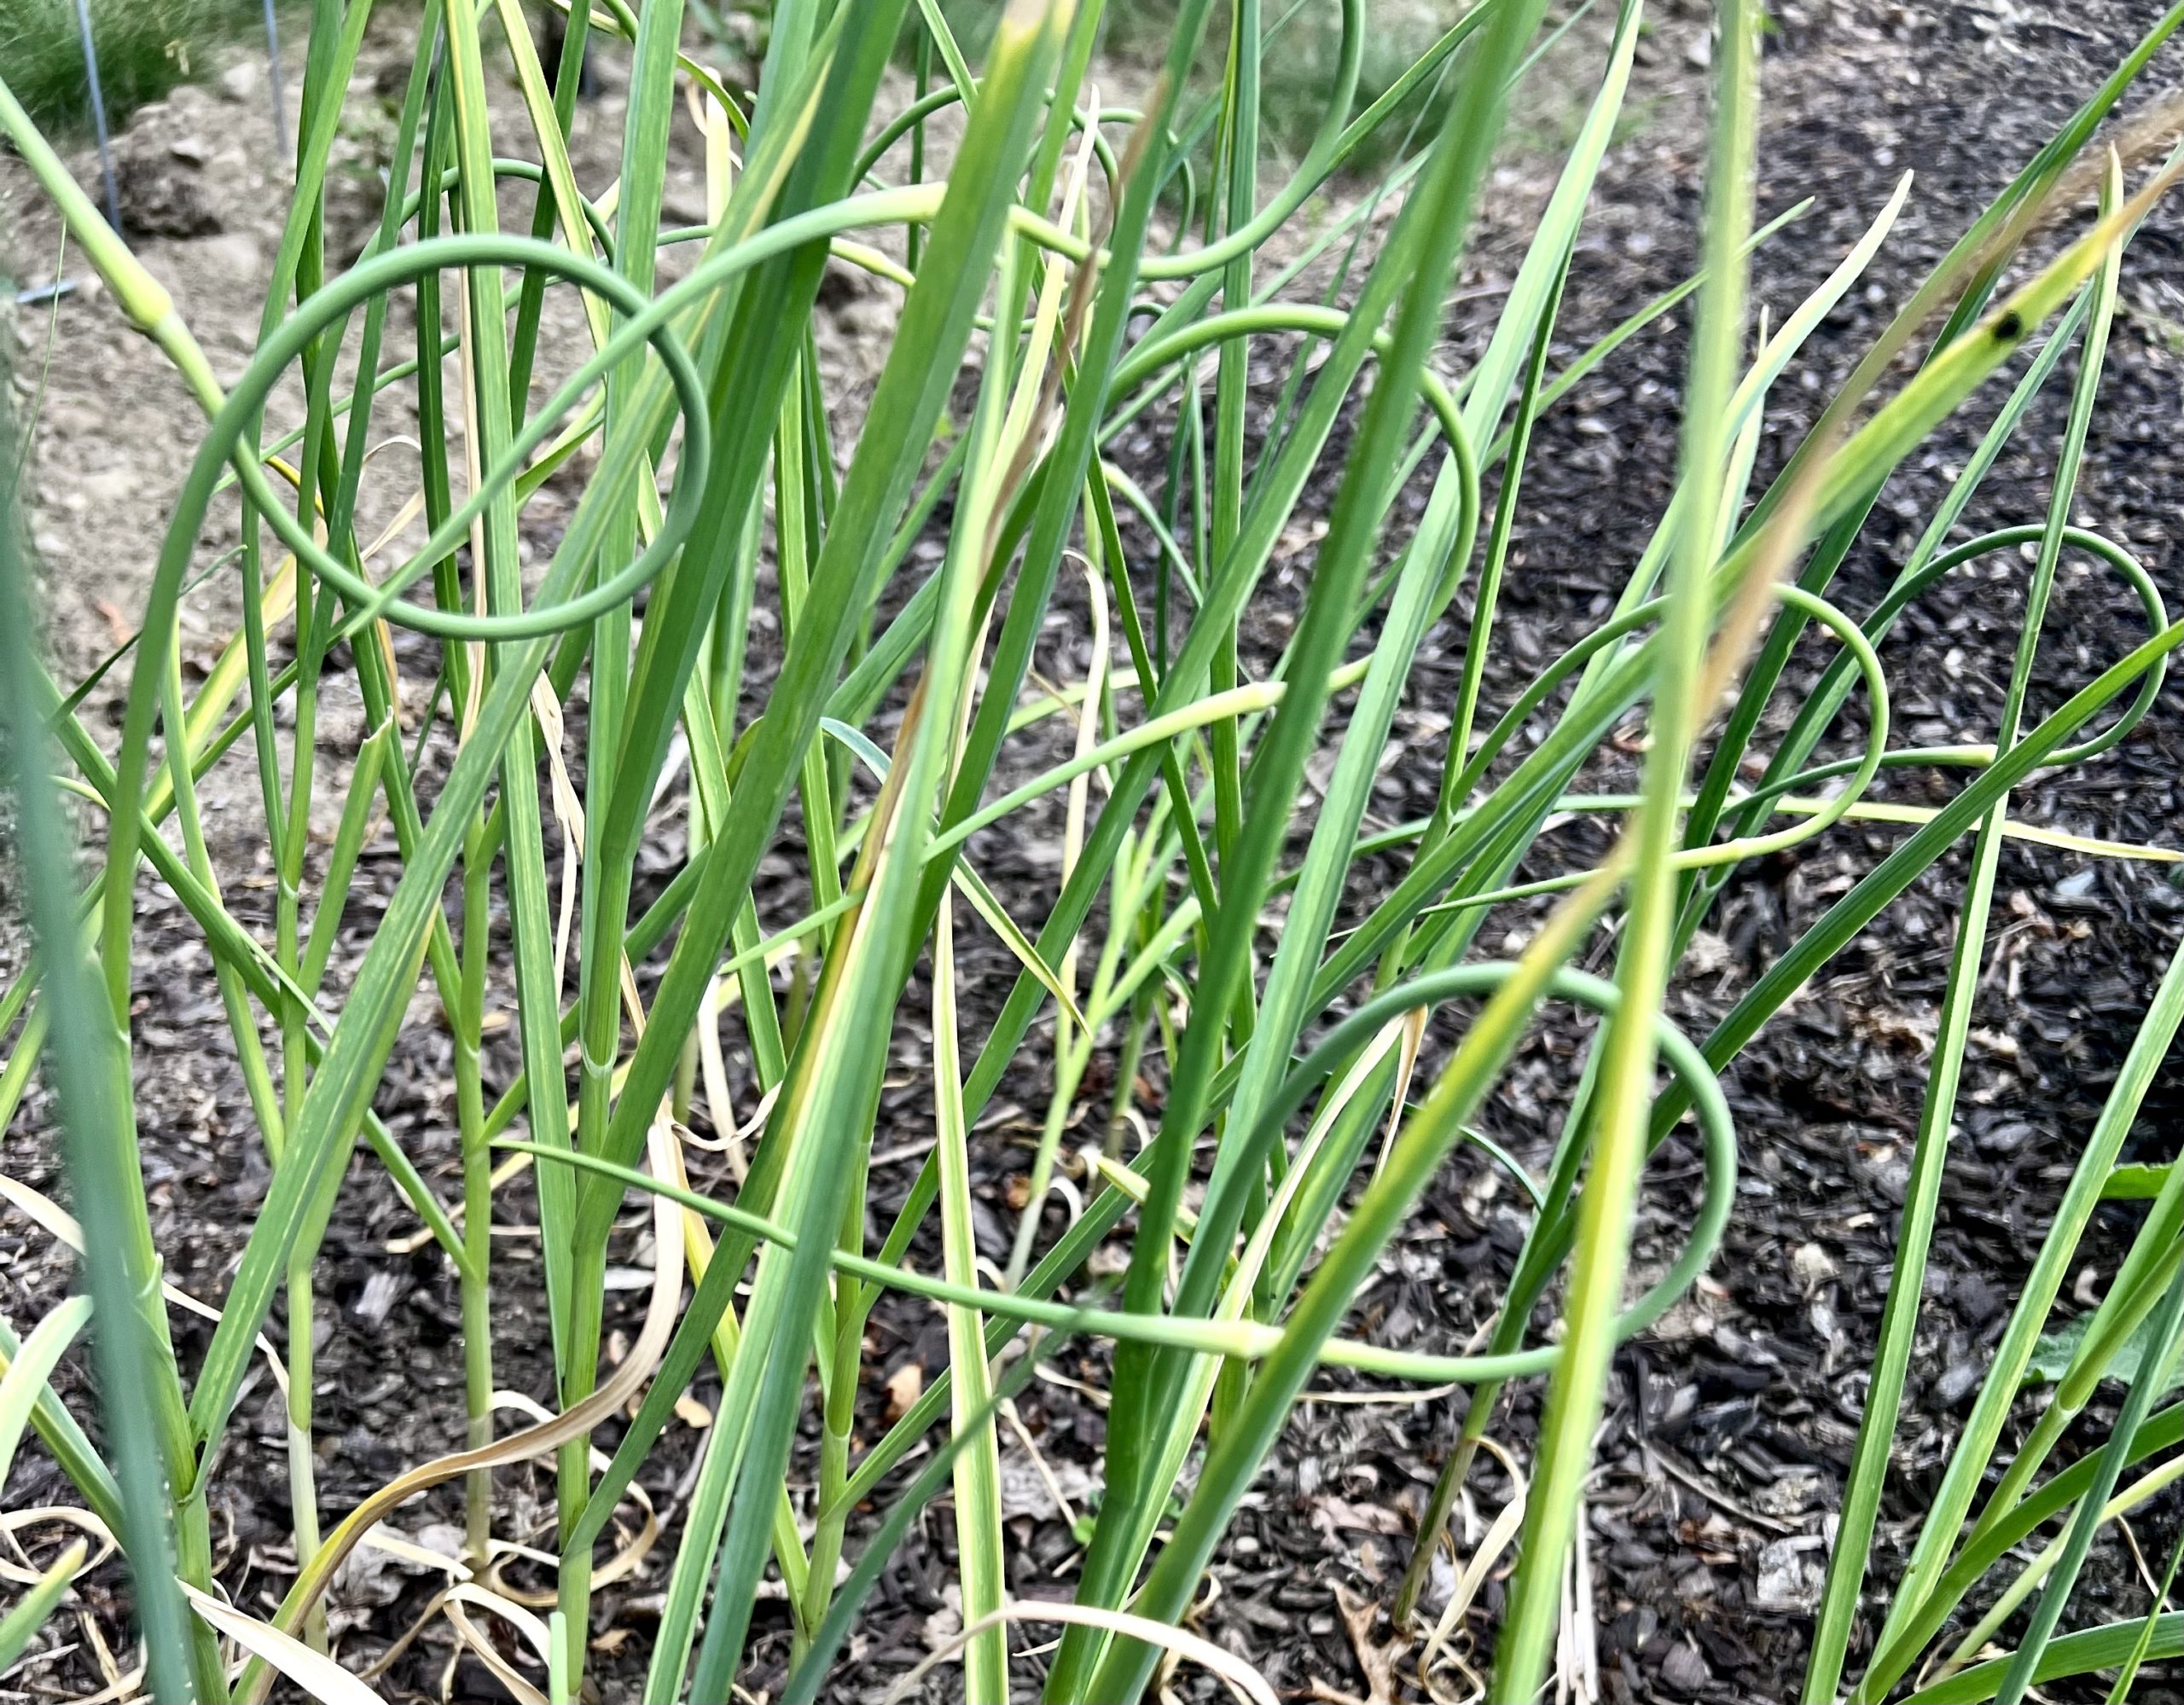 garlic scapes in the garden and ready to harvest
